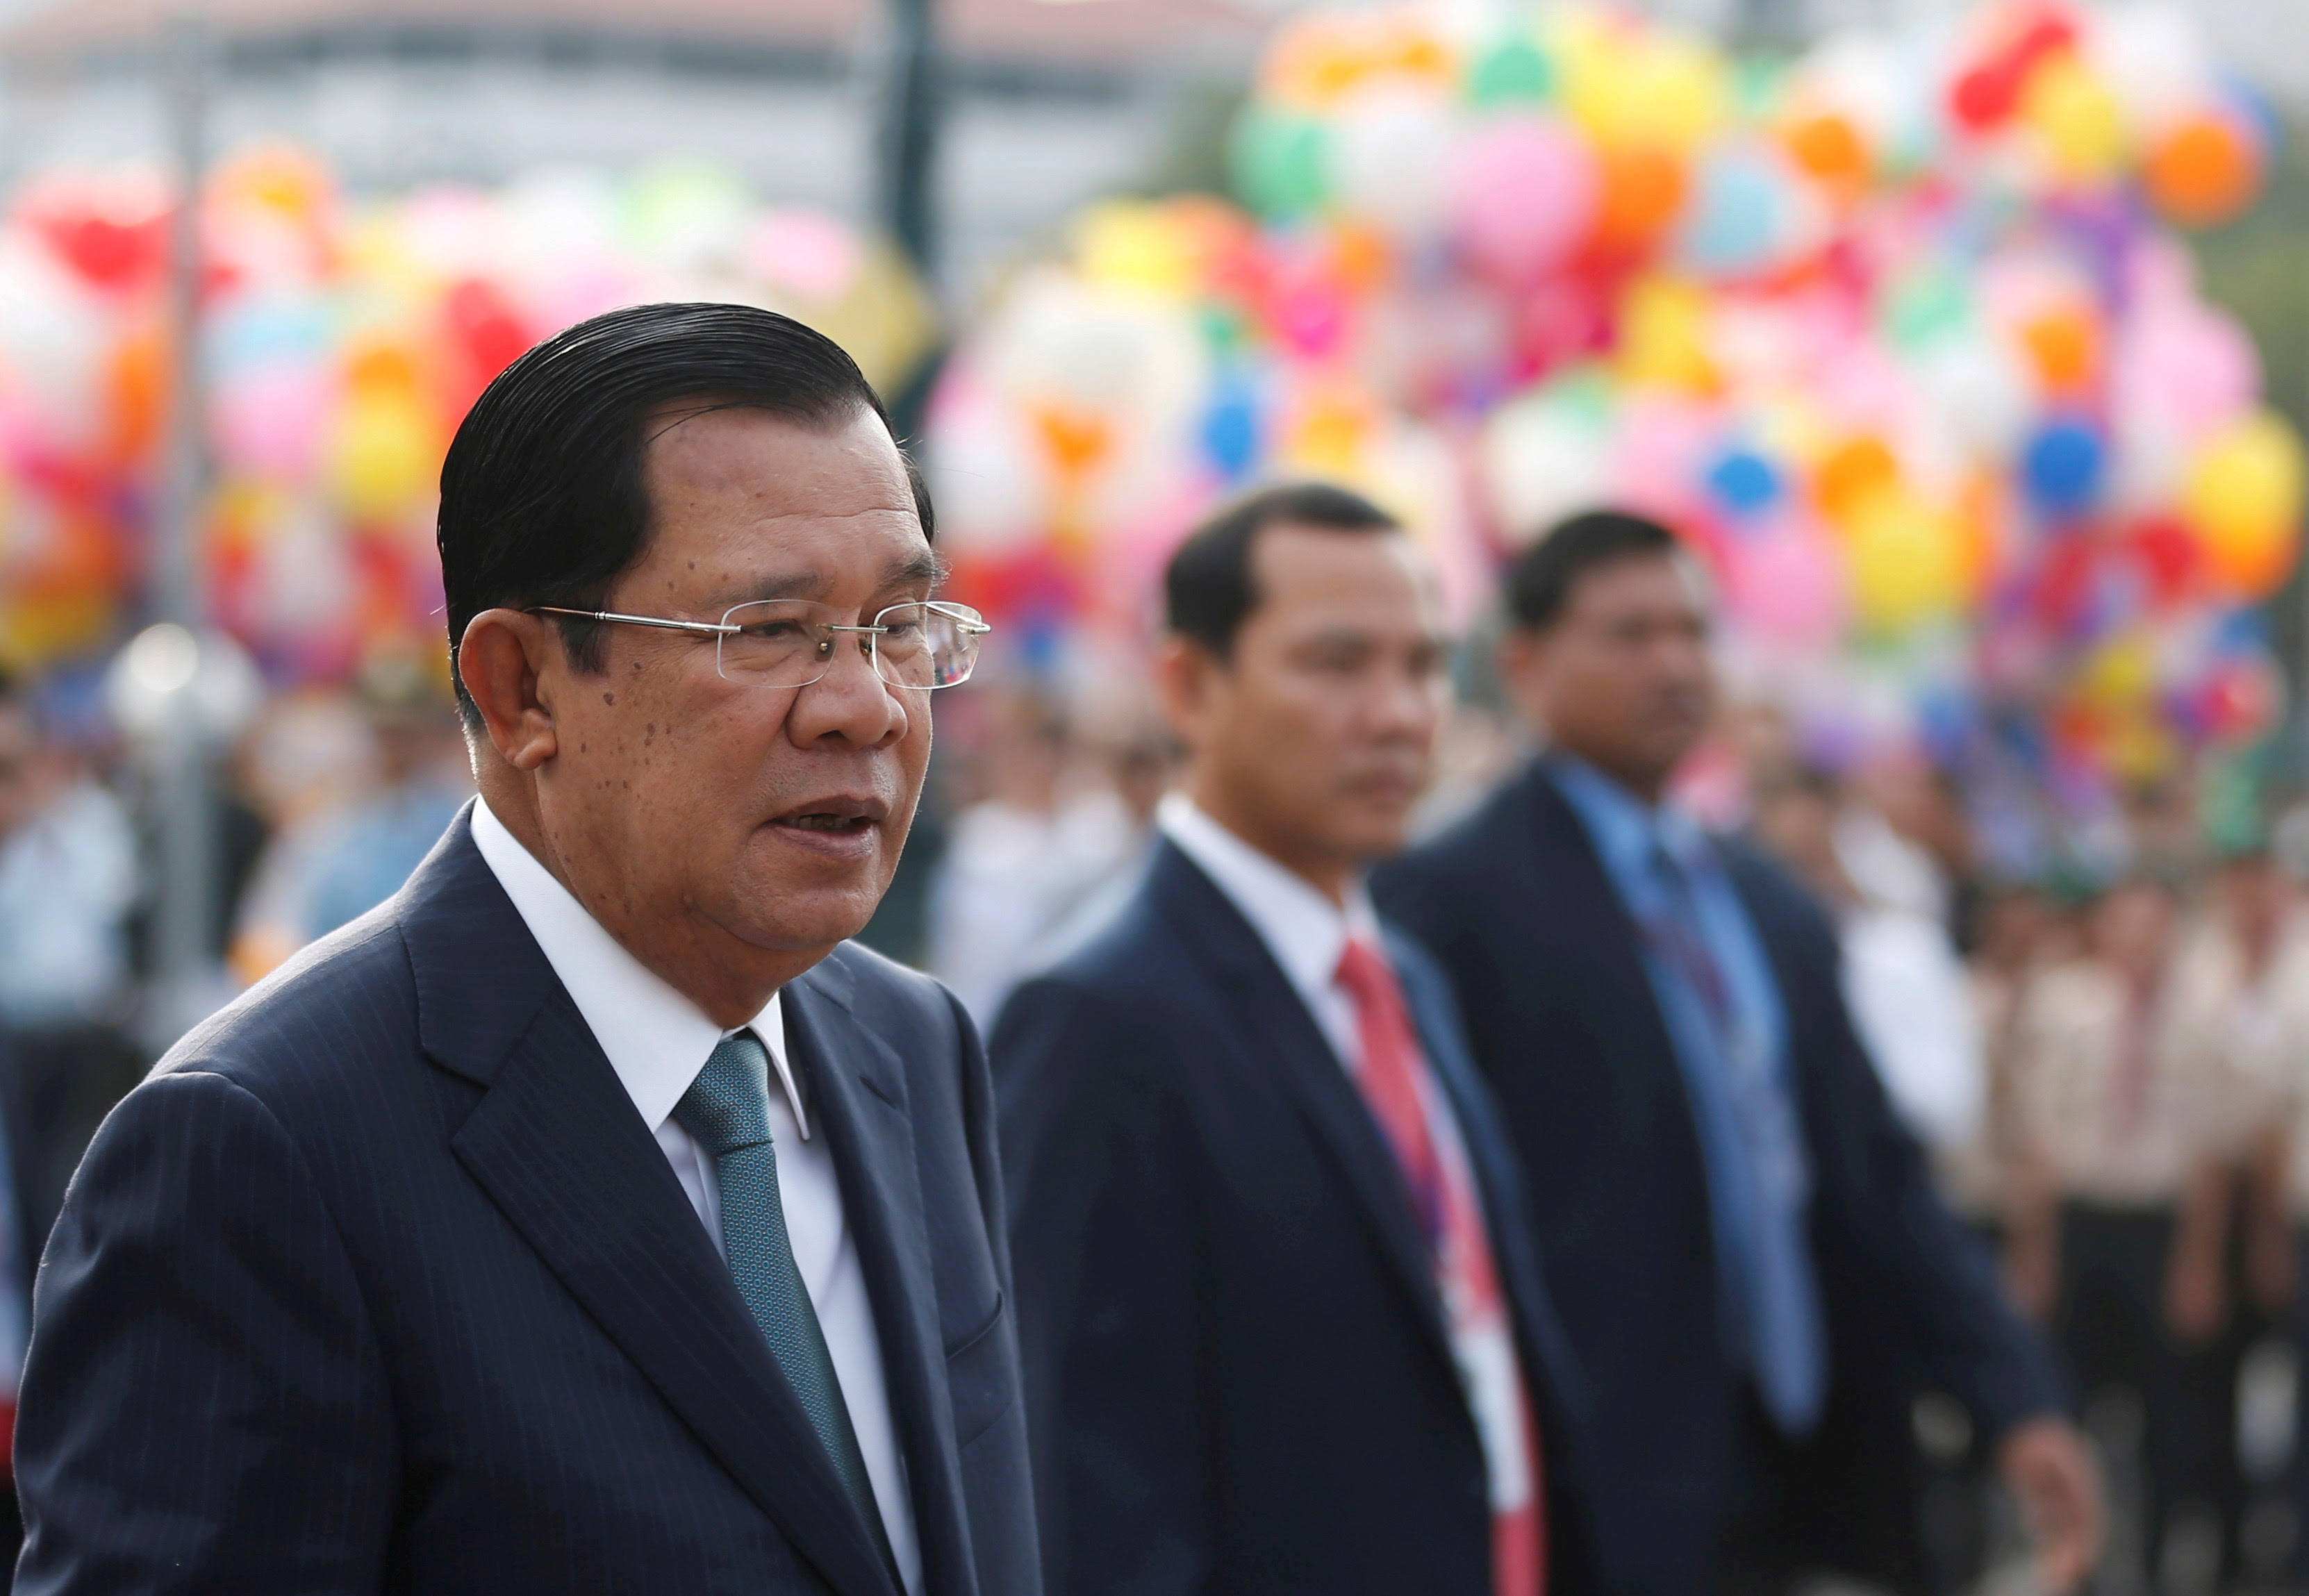 Cambodia's Prime Minister Hun Sen attends a celebrations marking the 66th anniversary of the country's independence from France, in central Phnom Penh, Cambodia, November 9, 2019. REUTERS/Samrang Pring/File Photo